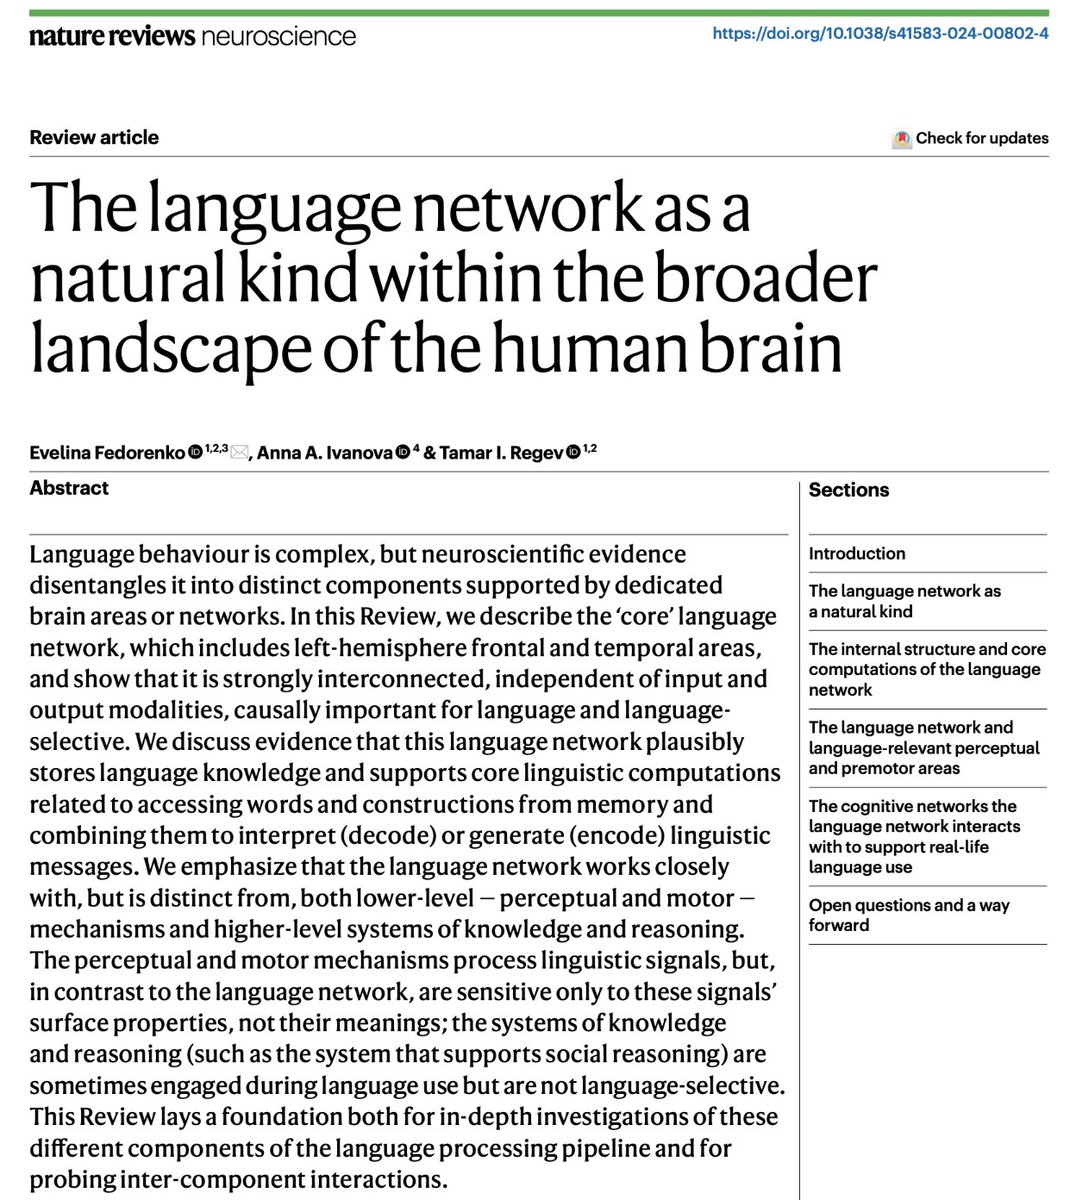 Thrilled to share a review on THE LANGUAGE NETWORK AS A NATURAL KIND—a culmination of ~20 yrs of thinking about+studying language from linguistic, psycholinguistic, and cog neuro perspectives. @NatRevNeurosci rdcu.be/dEylV With the amazing @neuranna @tamaregev 🥳 🧵1/n